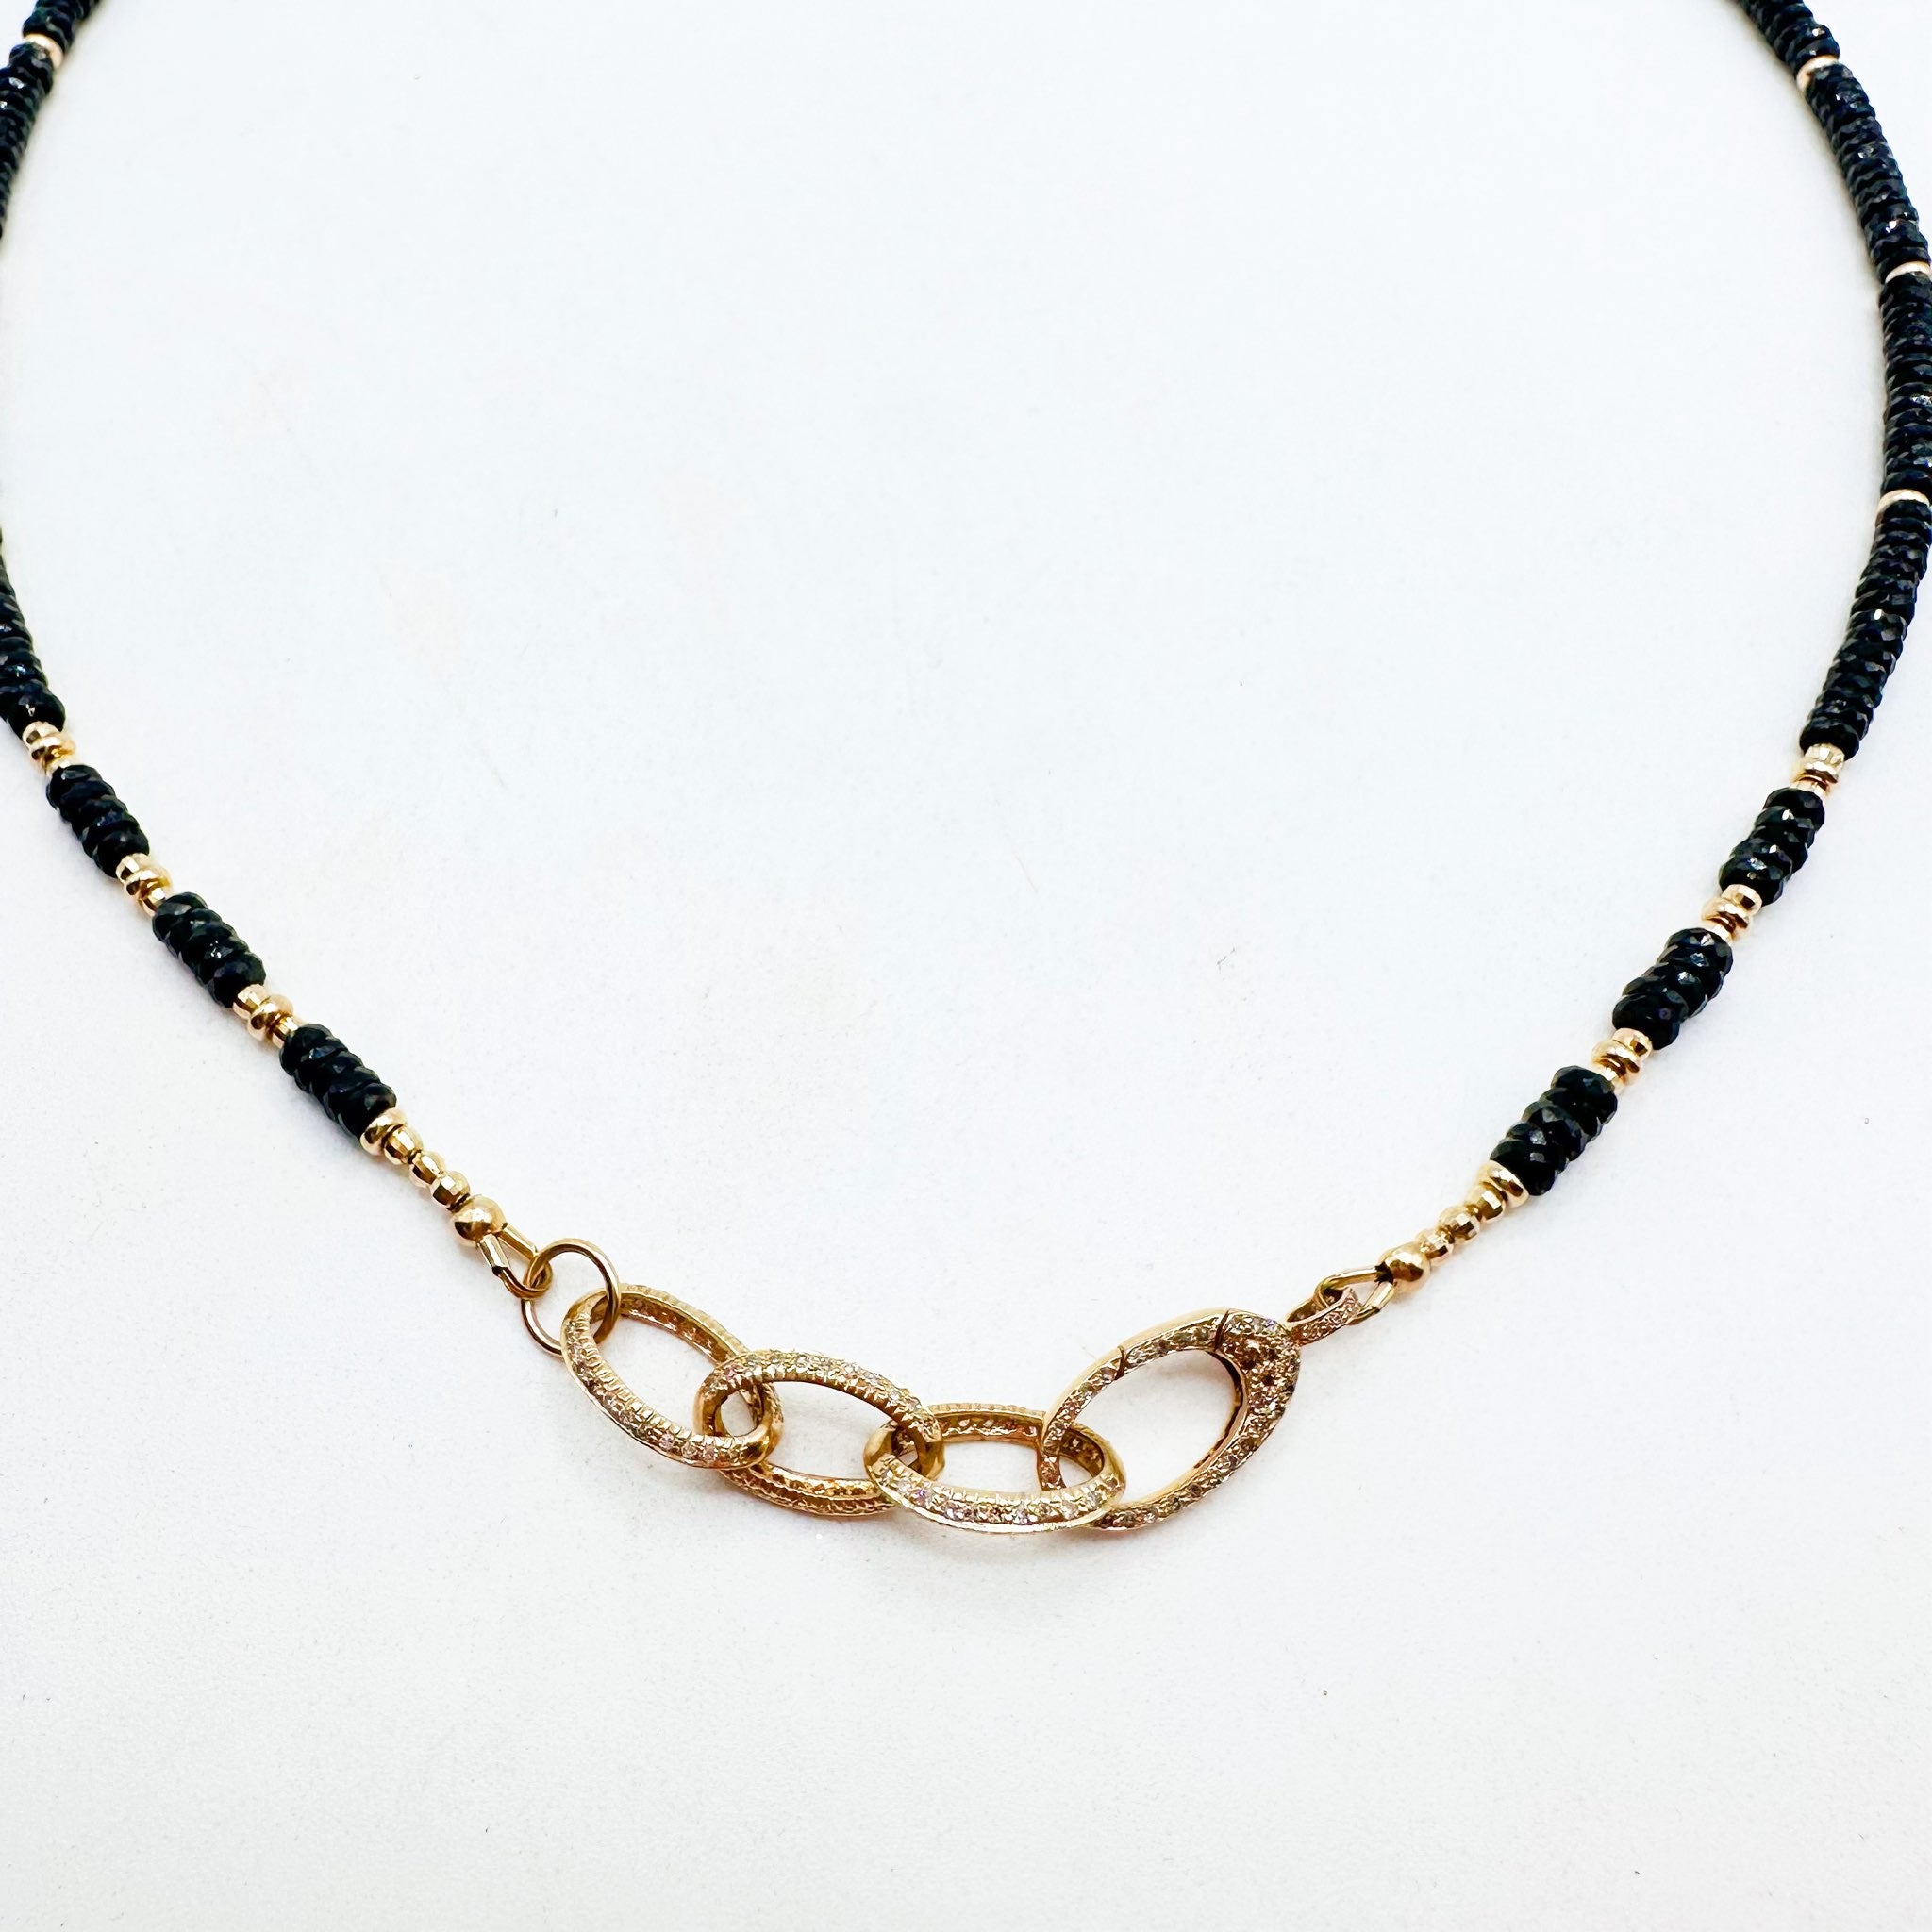 BLACK SPINEL AND DIAMOND LINK NECKLACE